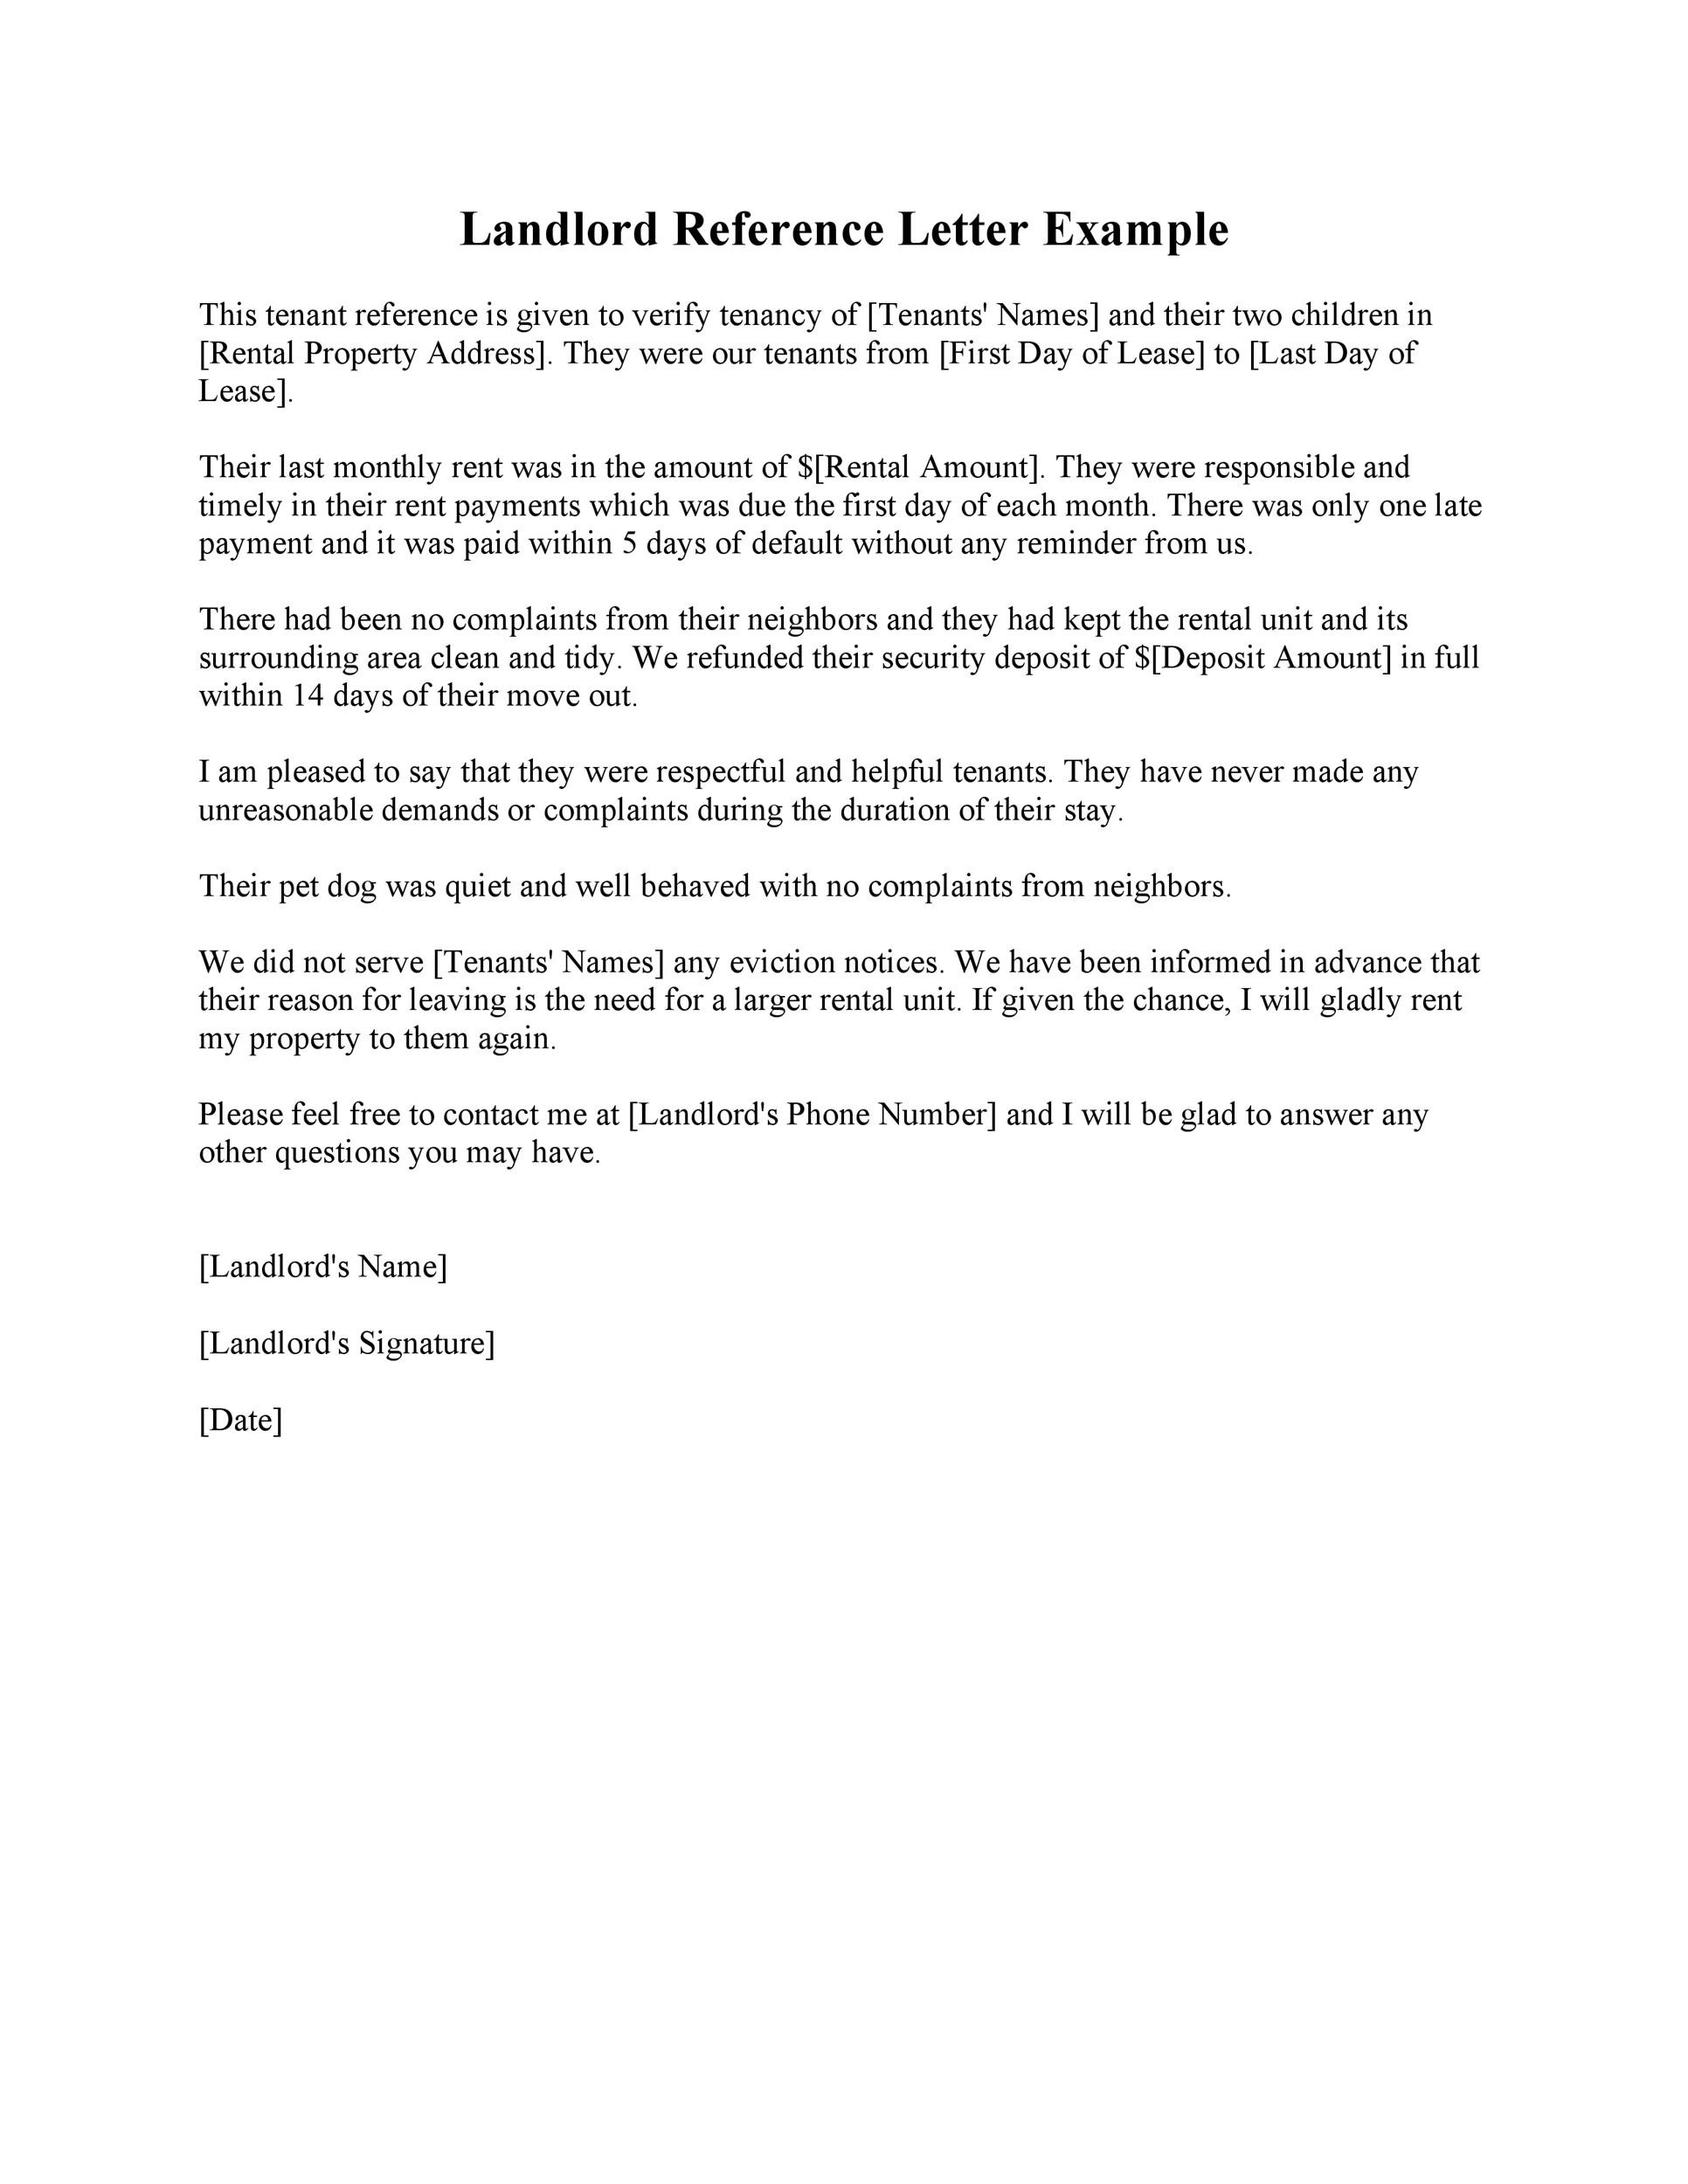 Free landlord reference letter 09